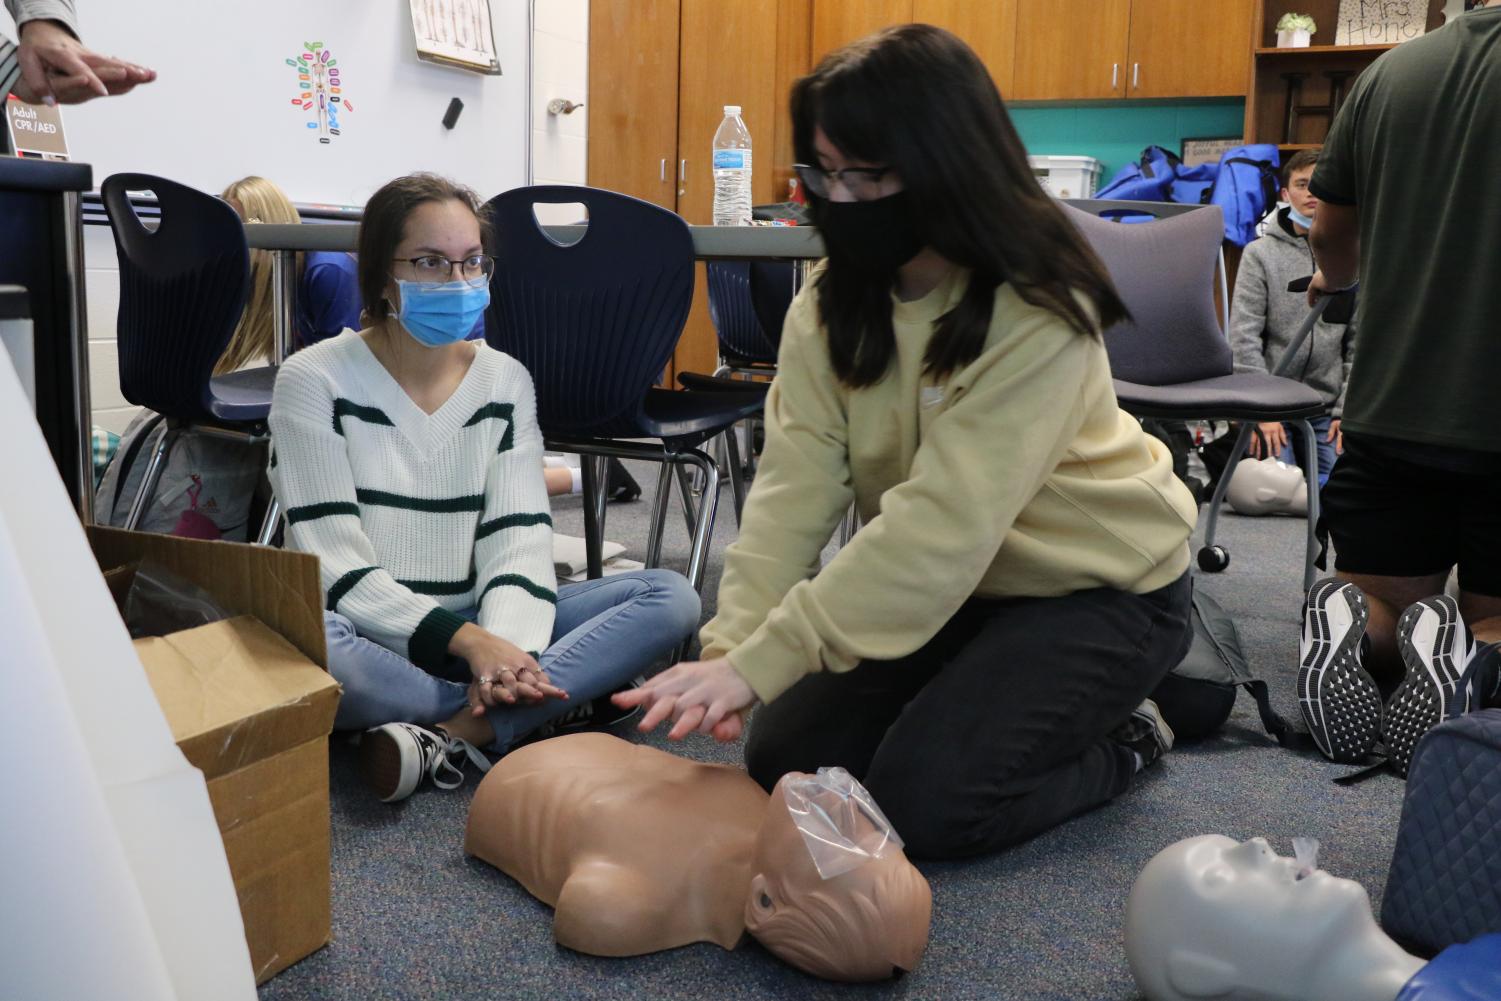 Sophomore Kylie Hester practices CPR on the CPR dummy.